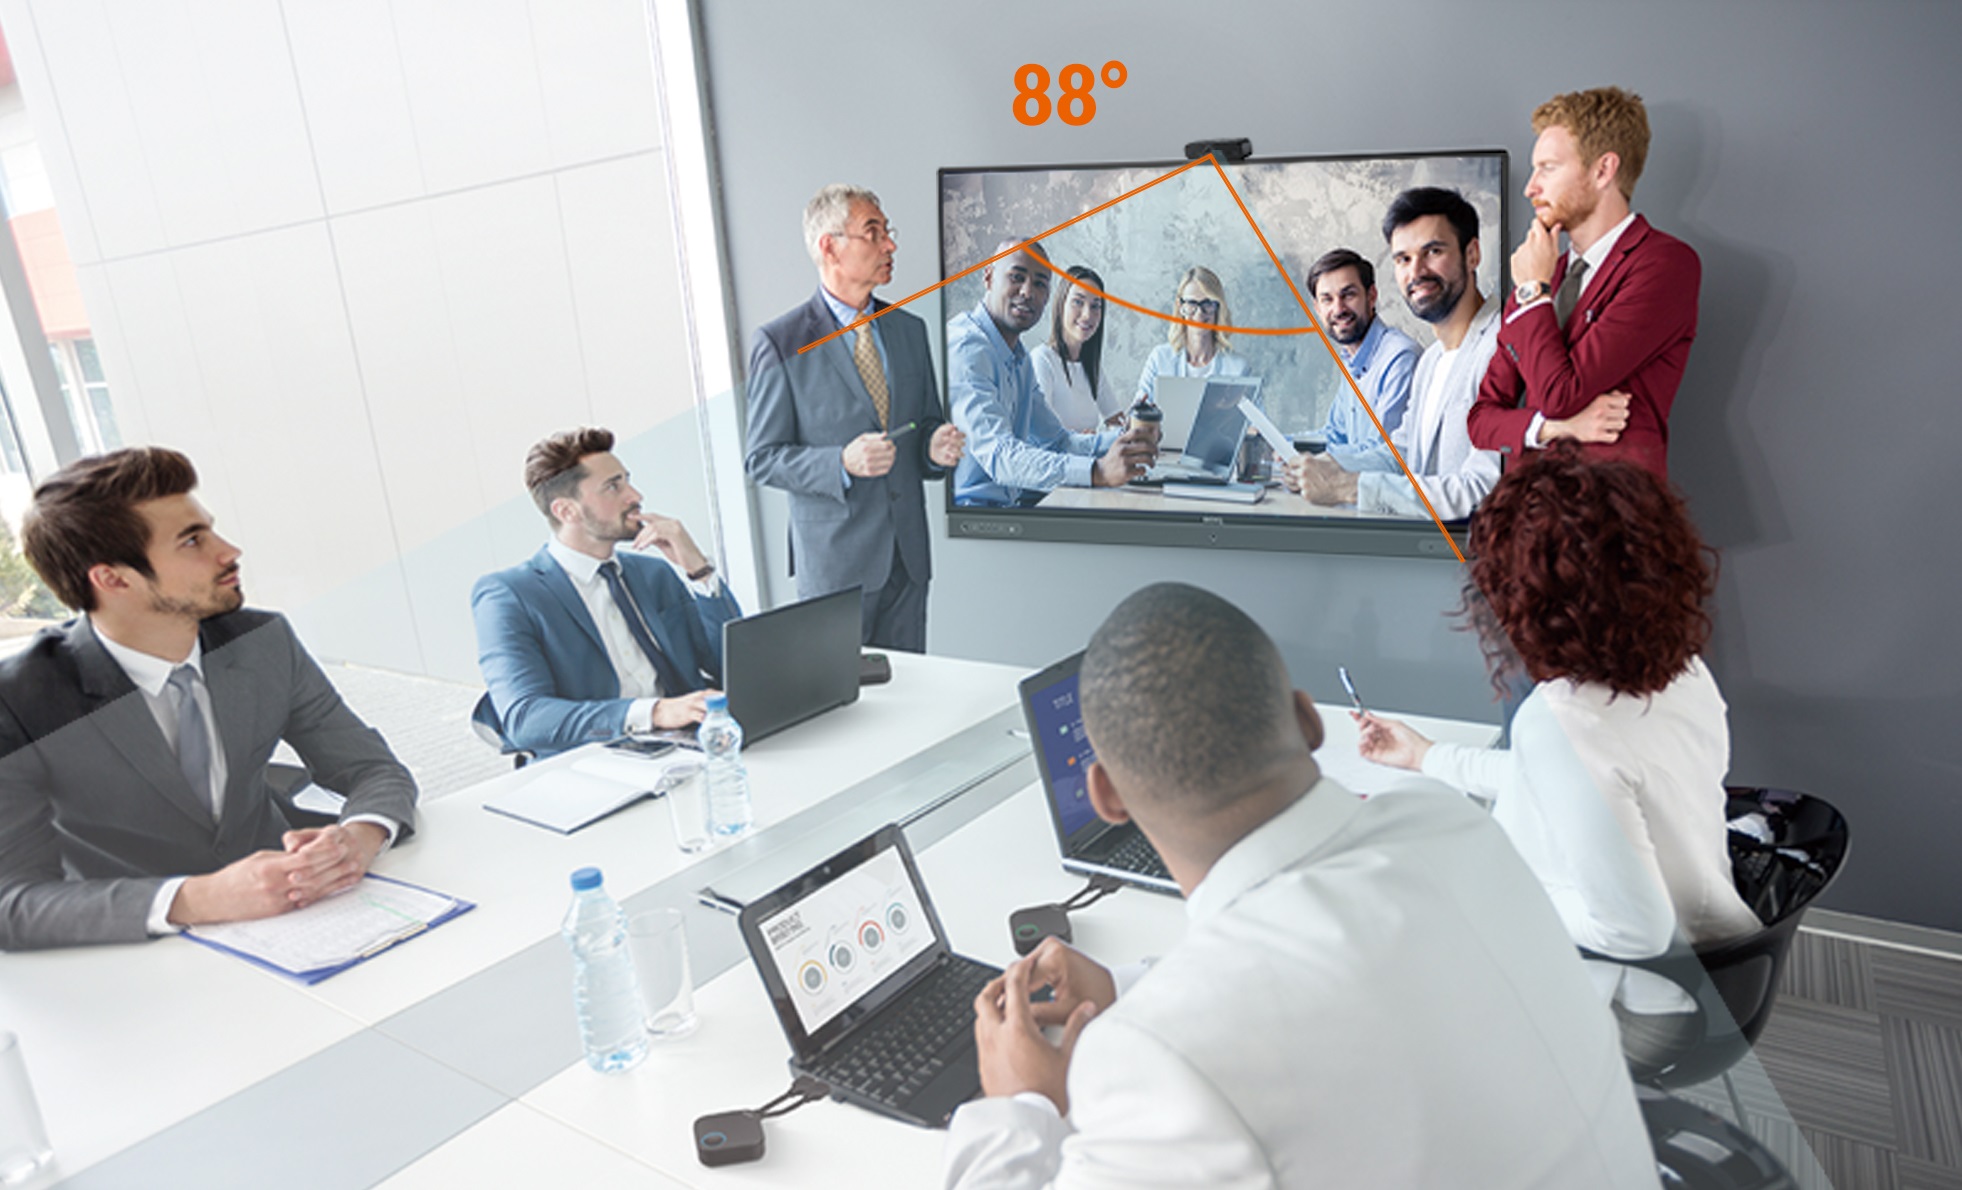 The DVY 21 features a wide field of view to provide crisp video within your meeting space,. perfect for huddle or small spaces. 